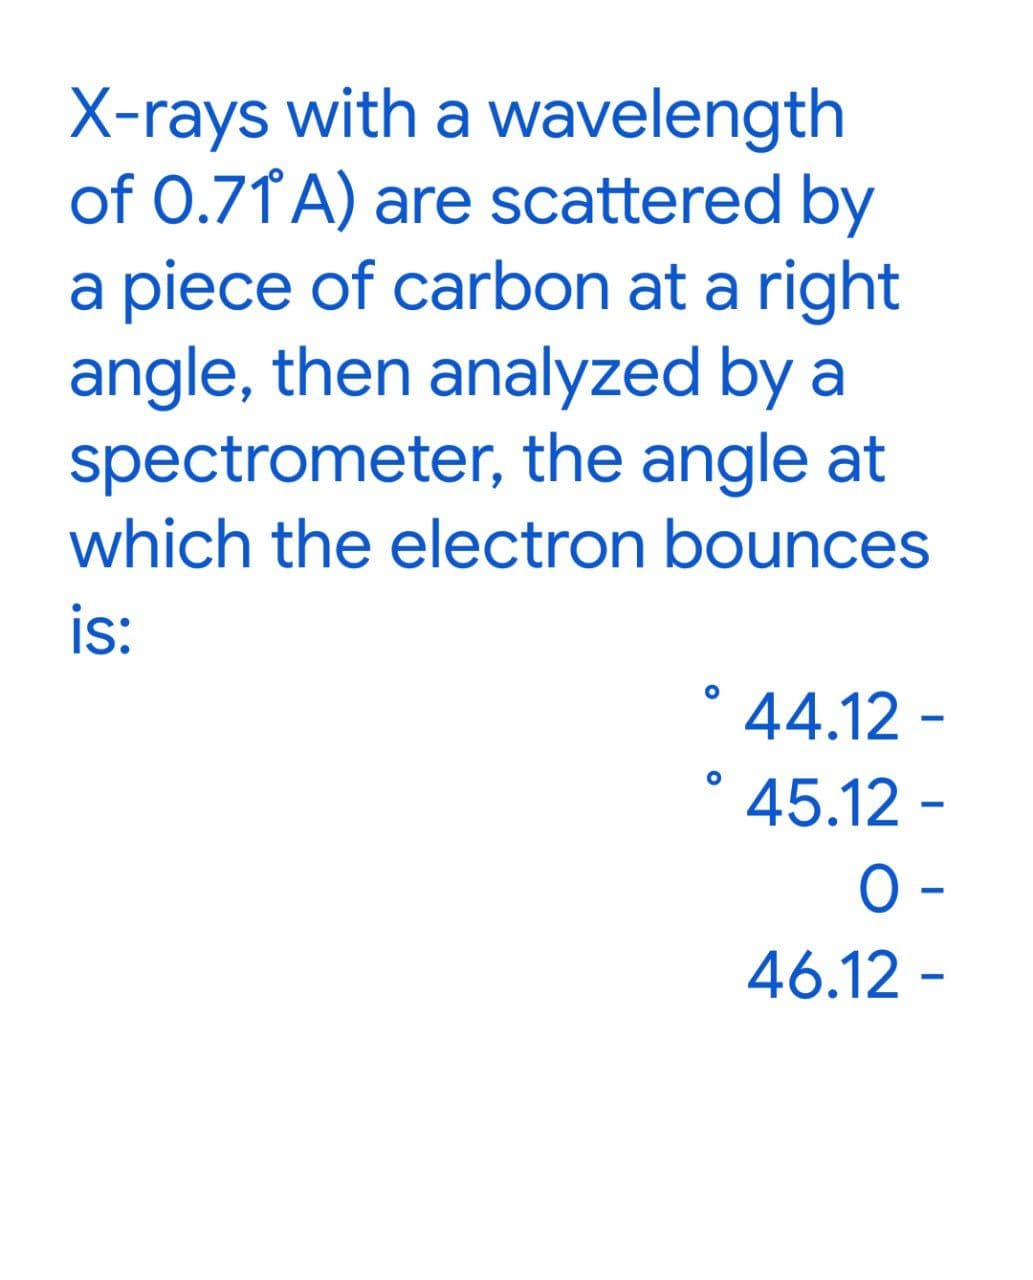 X-rays with a wavelength
of 0.71° A) are scattered by
a piece of carbon at a right
angle, then analyzed by a
spectrometer, the angle at
which the electron bounces
is:
O
° 44.12 -
45.12 -
O
O-
46.12 -
-